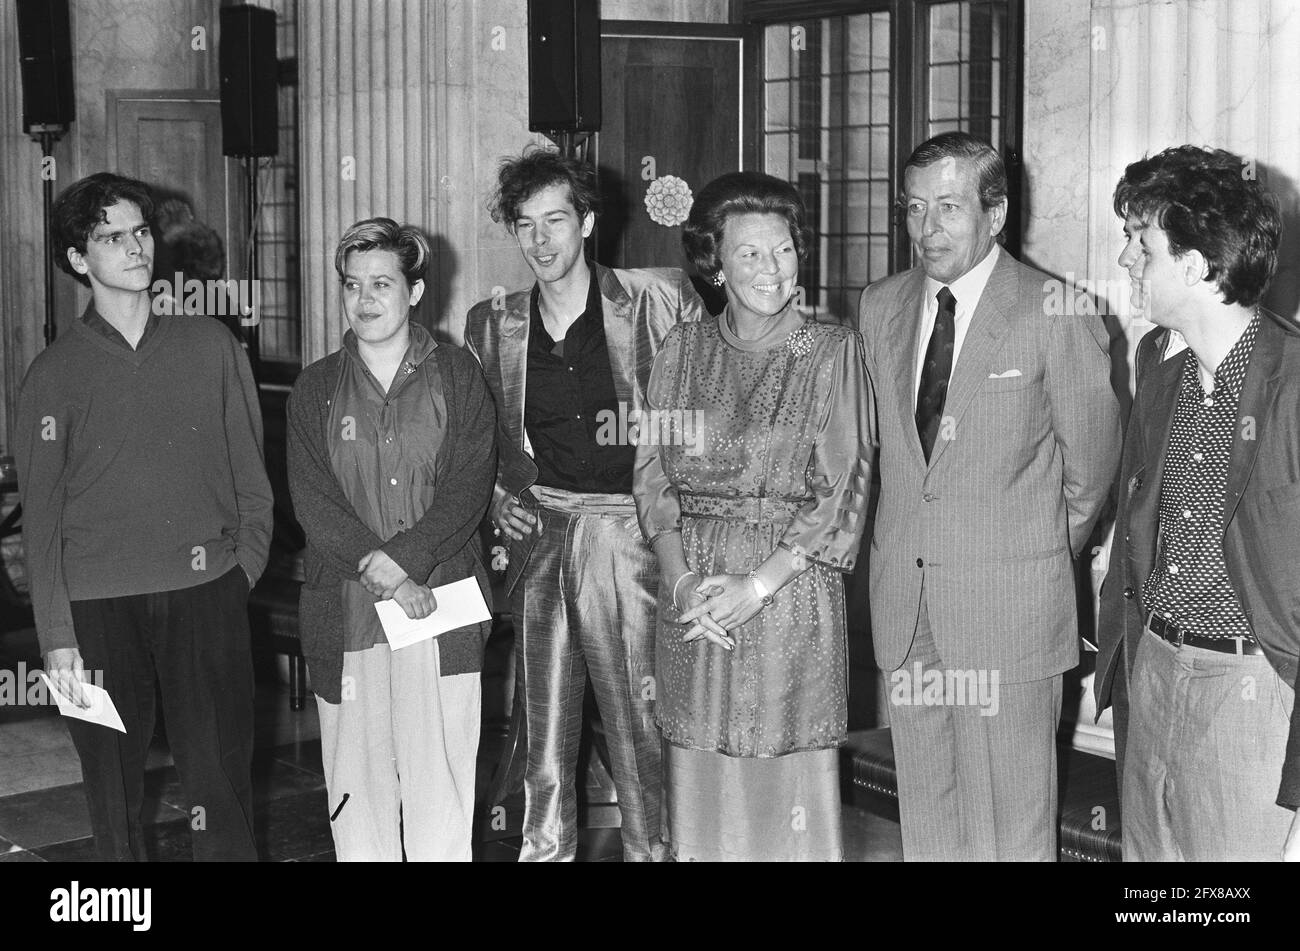 Queen Beatrix presents the prizes for Free Painting at Paleis op de Dam. The six prize winners are: Ellen van Eldik from Nijmegen, Lex van Lith from Tilburg and Manel Esparbé Gasca, Reggy Gunn, Berend Hoekstra and Kees Versloot from Amsterdam, October 11, 1985, arrivals, The Netherlands, 20th century press agency photo, news to remember, documentary, historic photography 1945-1990, visual stories, human history of the Twentieth Century, capturing moments in time Stock Photo